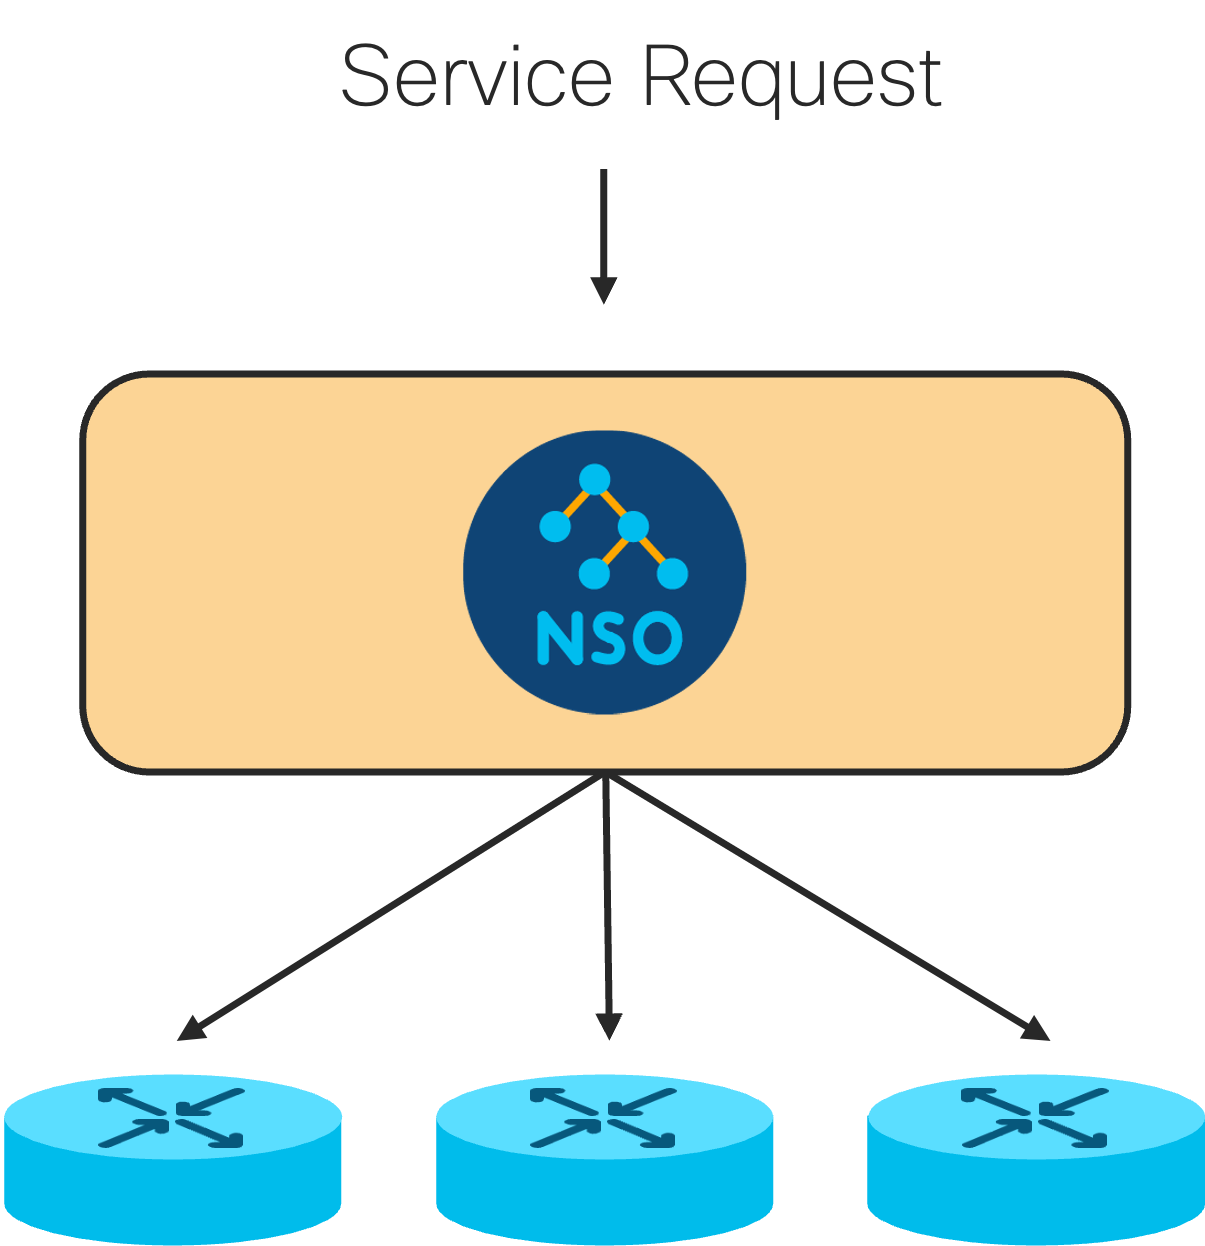 Service provisioning multiple devices